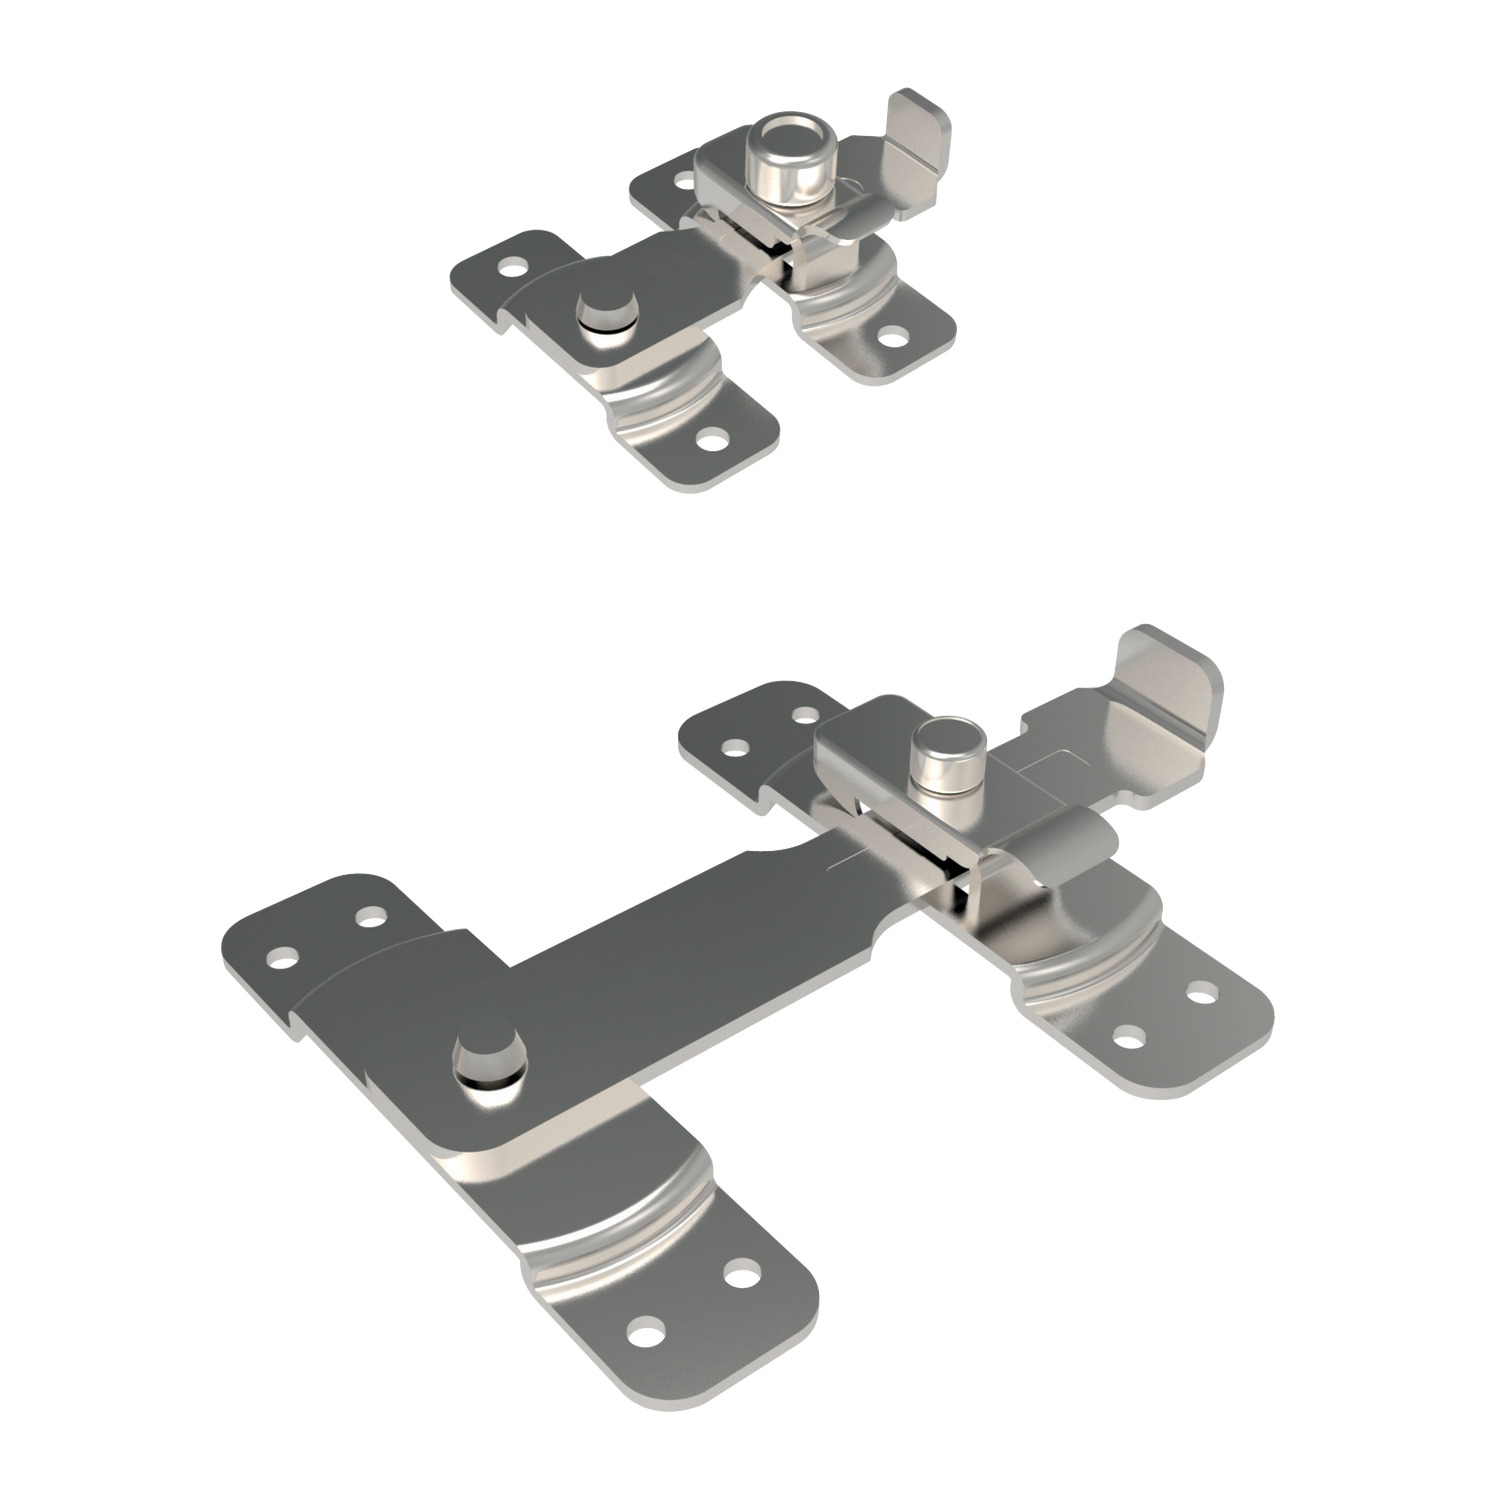 J6240.AC0150 Bar Latches Stainless Steel Spring loaded. 155 x 120